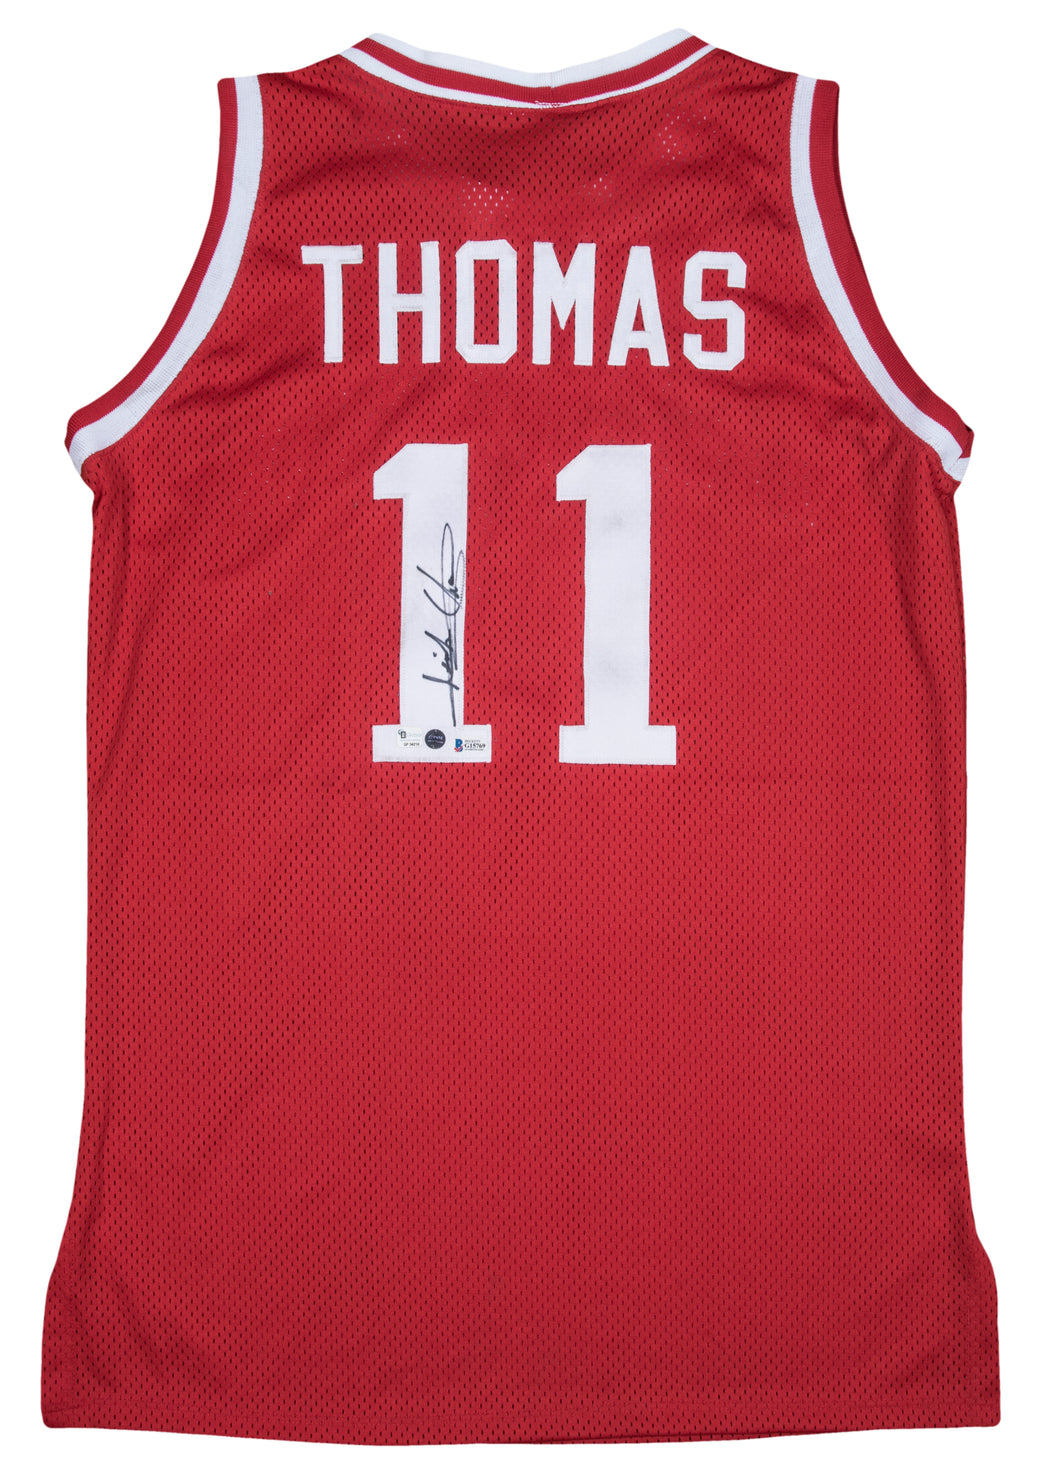 Isiah Thomas Autographed Indiana Hoosiers Jersey